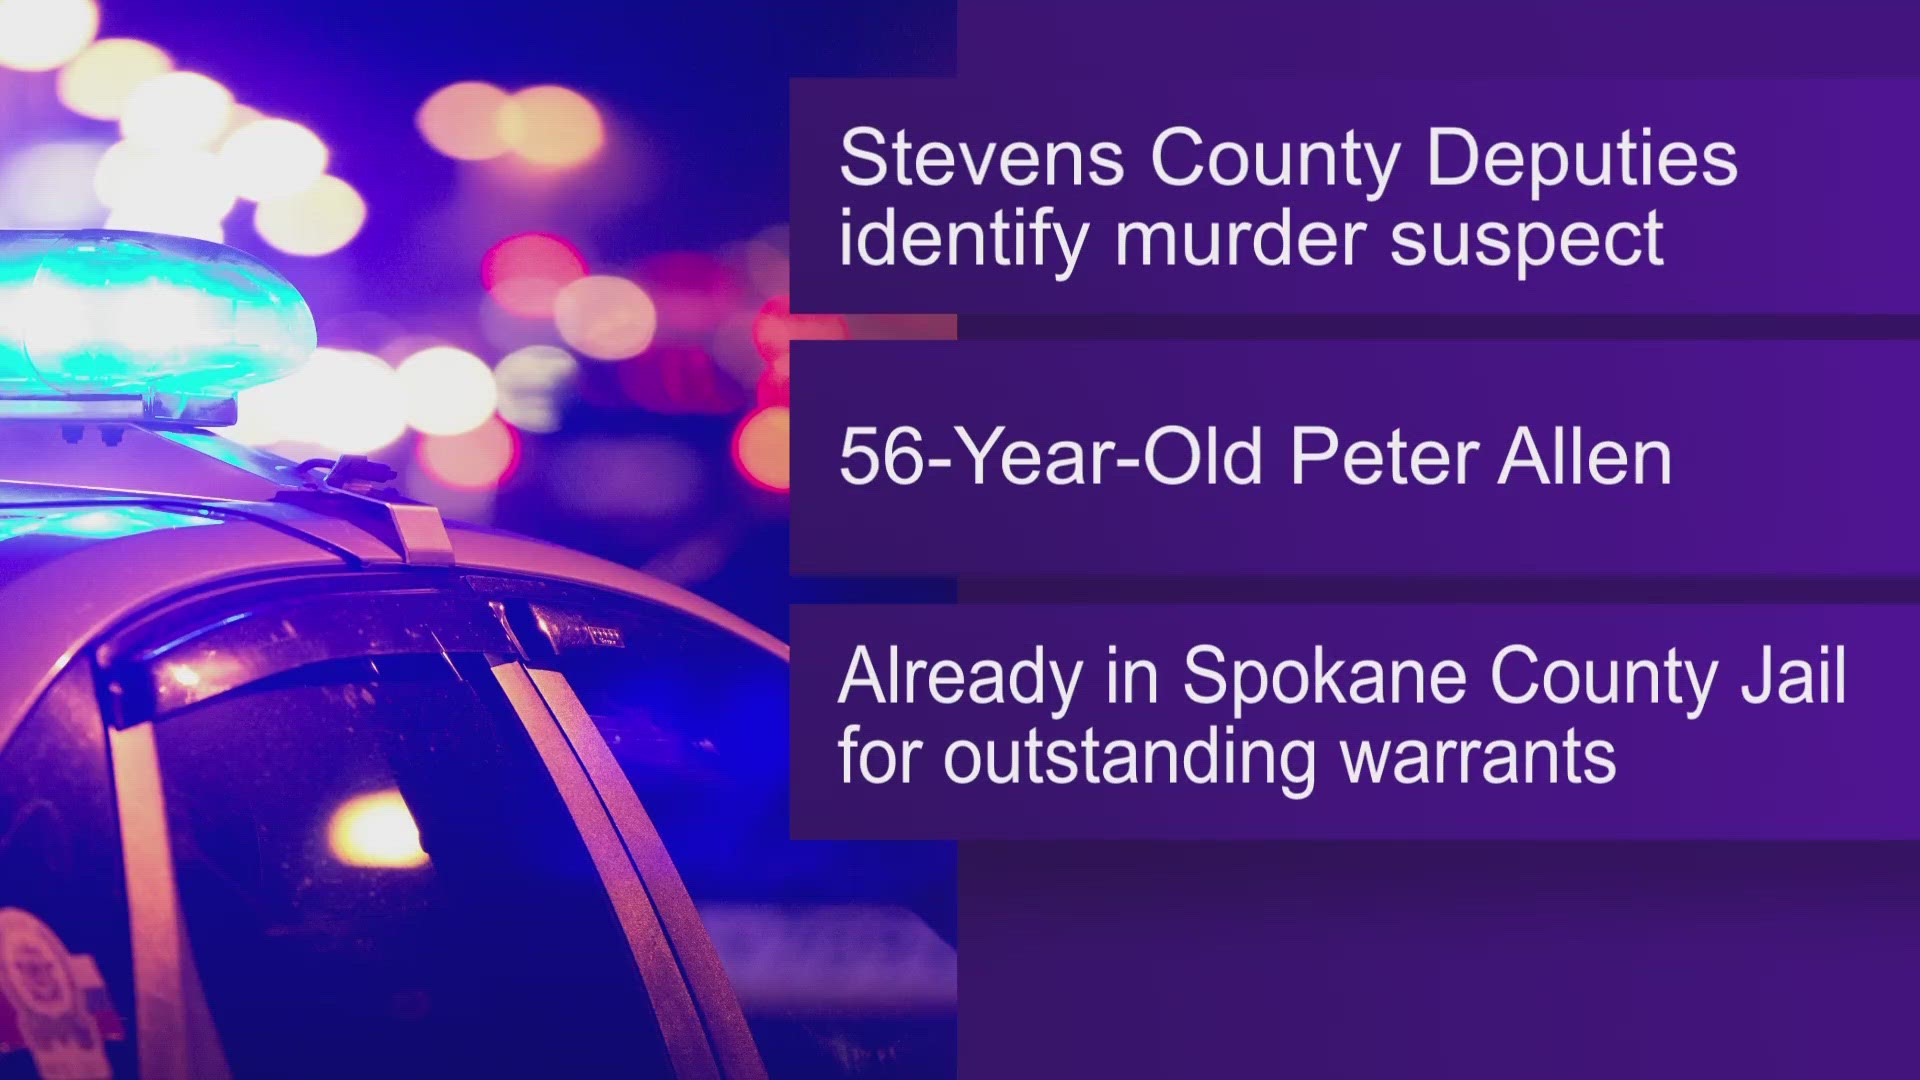 53-year-old Peter A. Allen was arrested on Wednesday after allegedly shooting and killing a man in Stevens County on March 17.